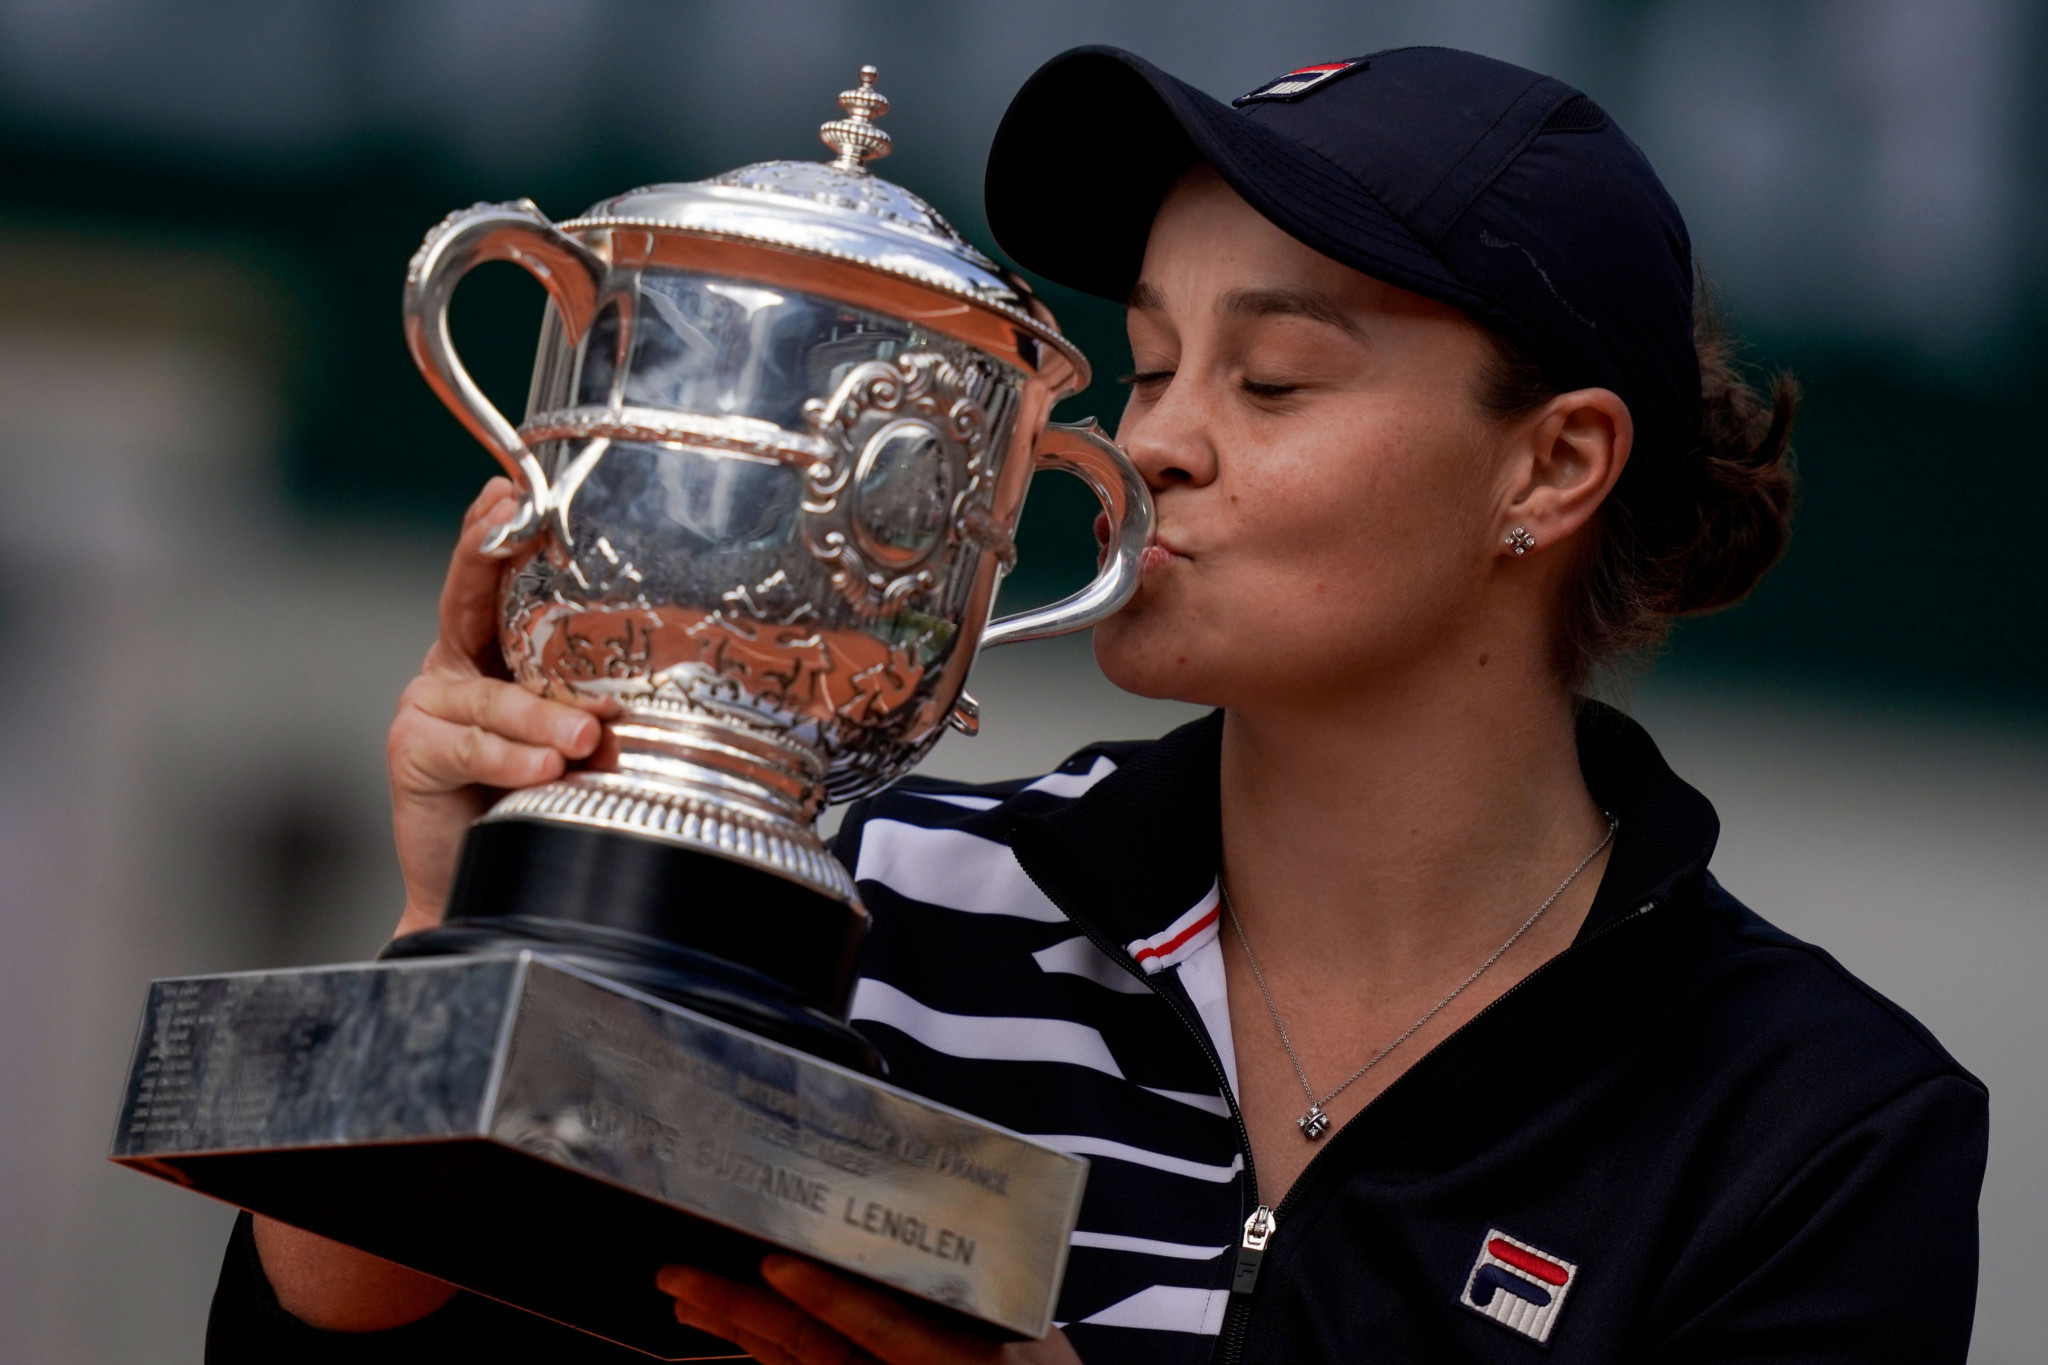 Australia's Ashleigh Barty kisses the trophy Suzanne Lenglen after winning the French Open title ©Getty Images